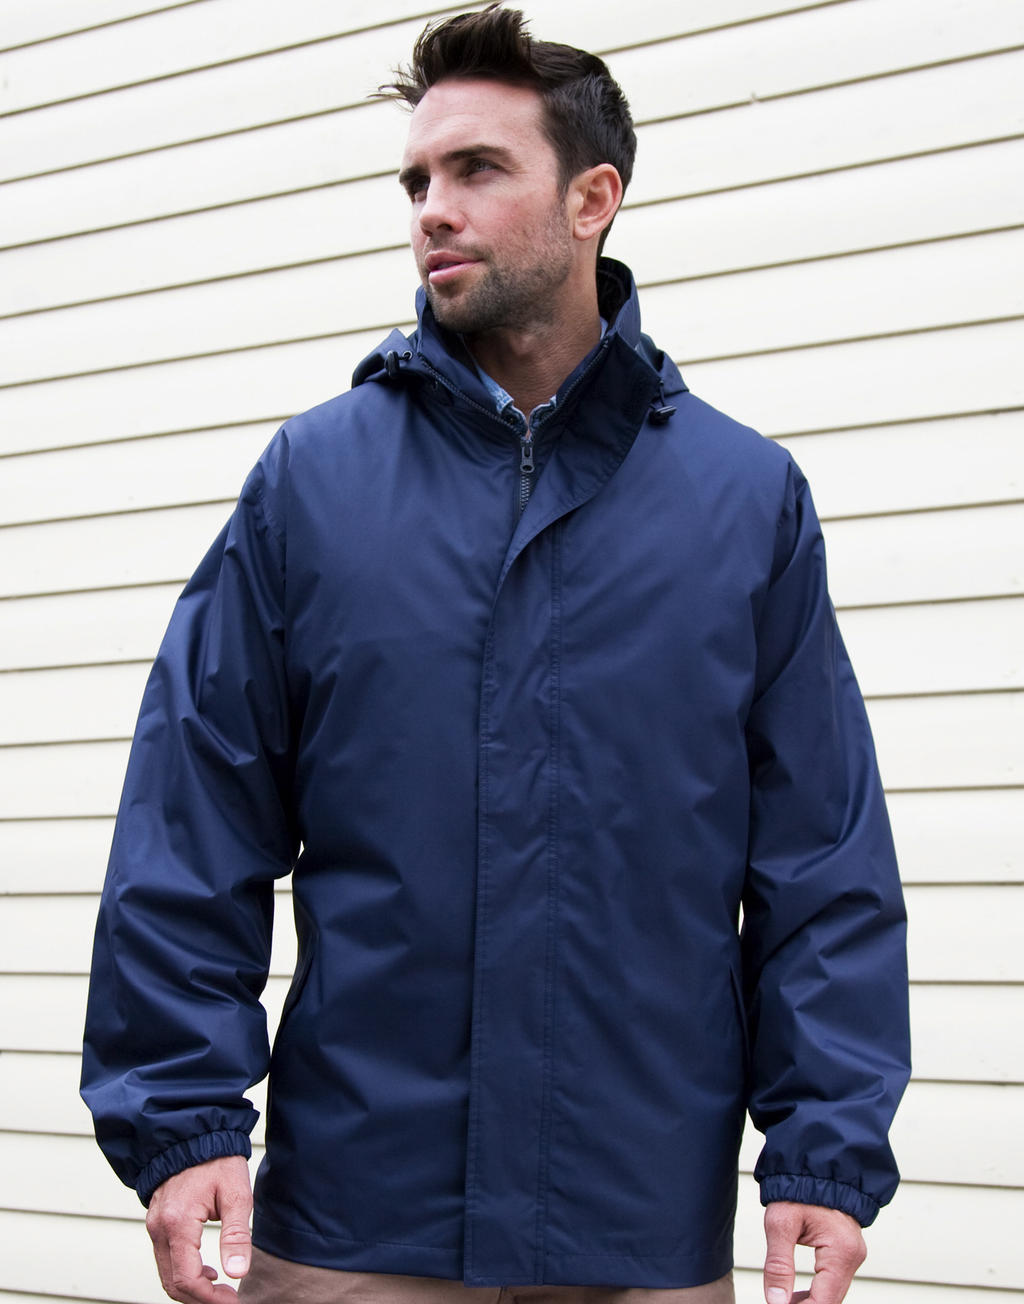 3-in-1 Jacket with quilted Bodywarmer